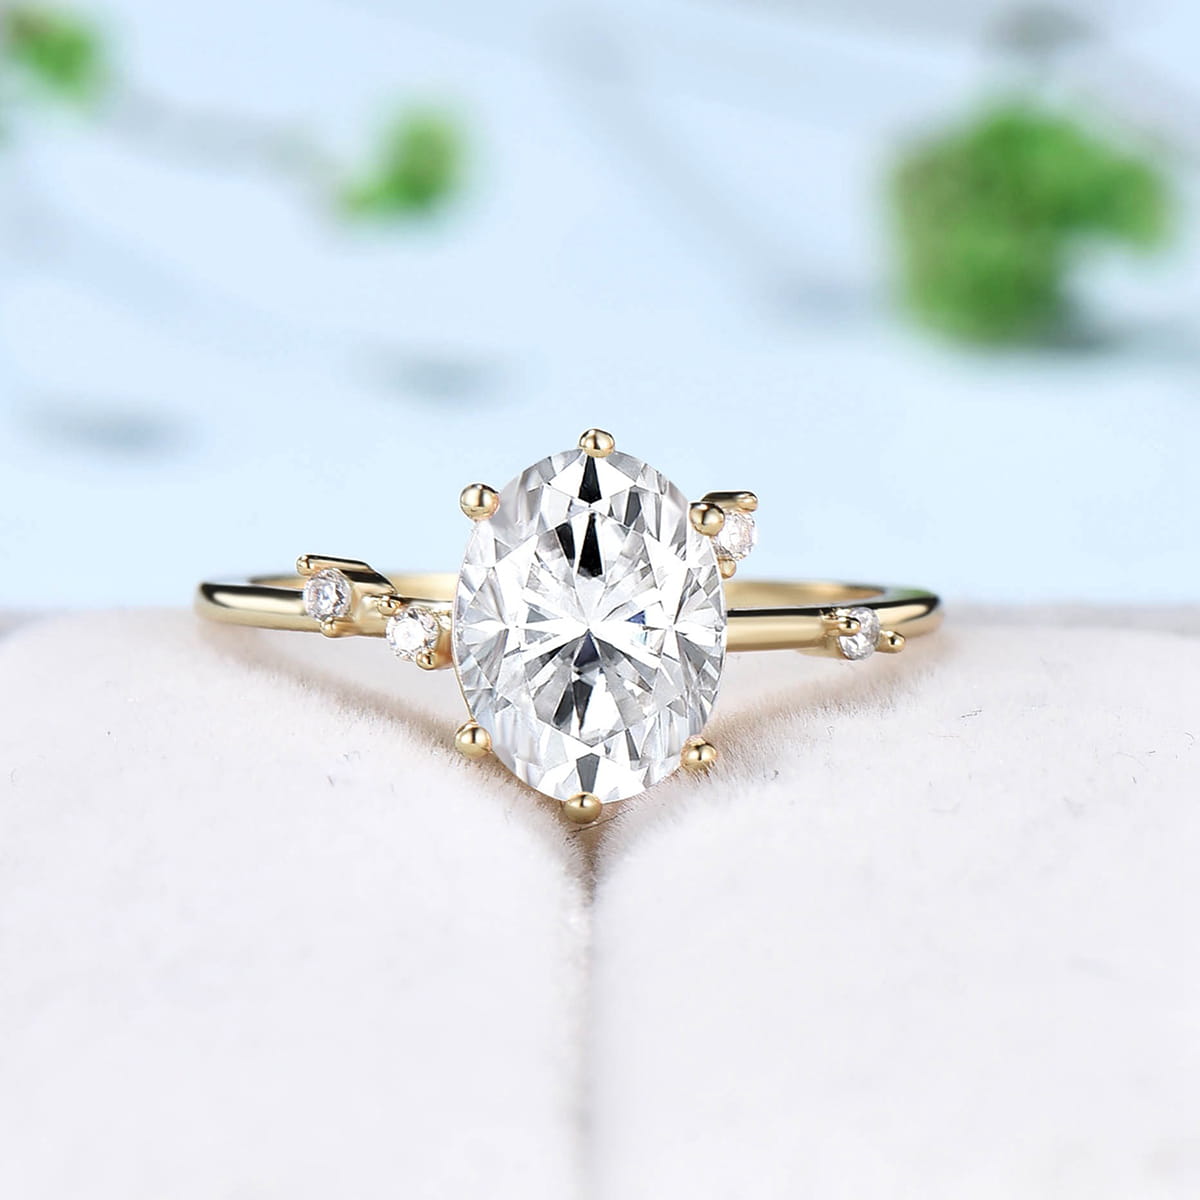 Dainty Oval cut moissanite engagement ring solid 14k yellow gold Minimalist 6 prongs cluster diamond promise wedding ring women jewelry gift - PENFINE